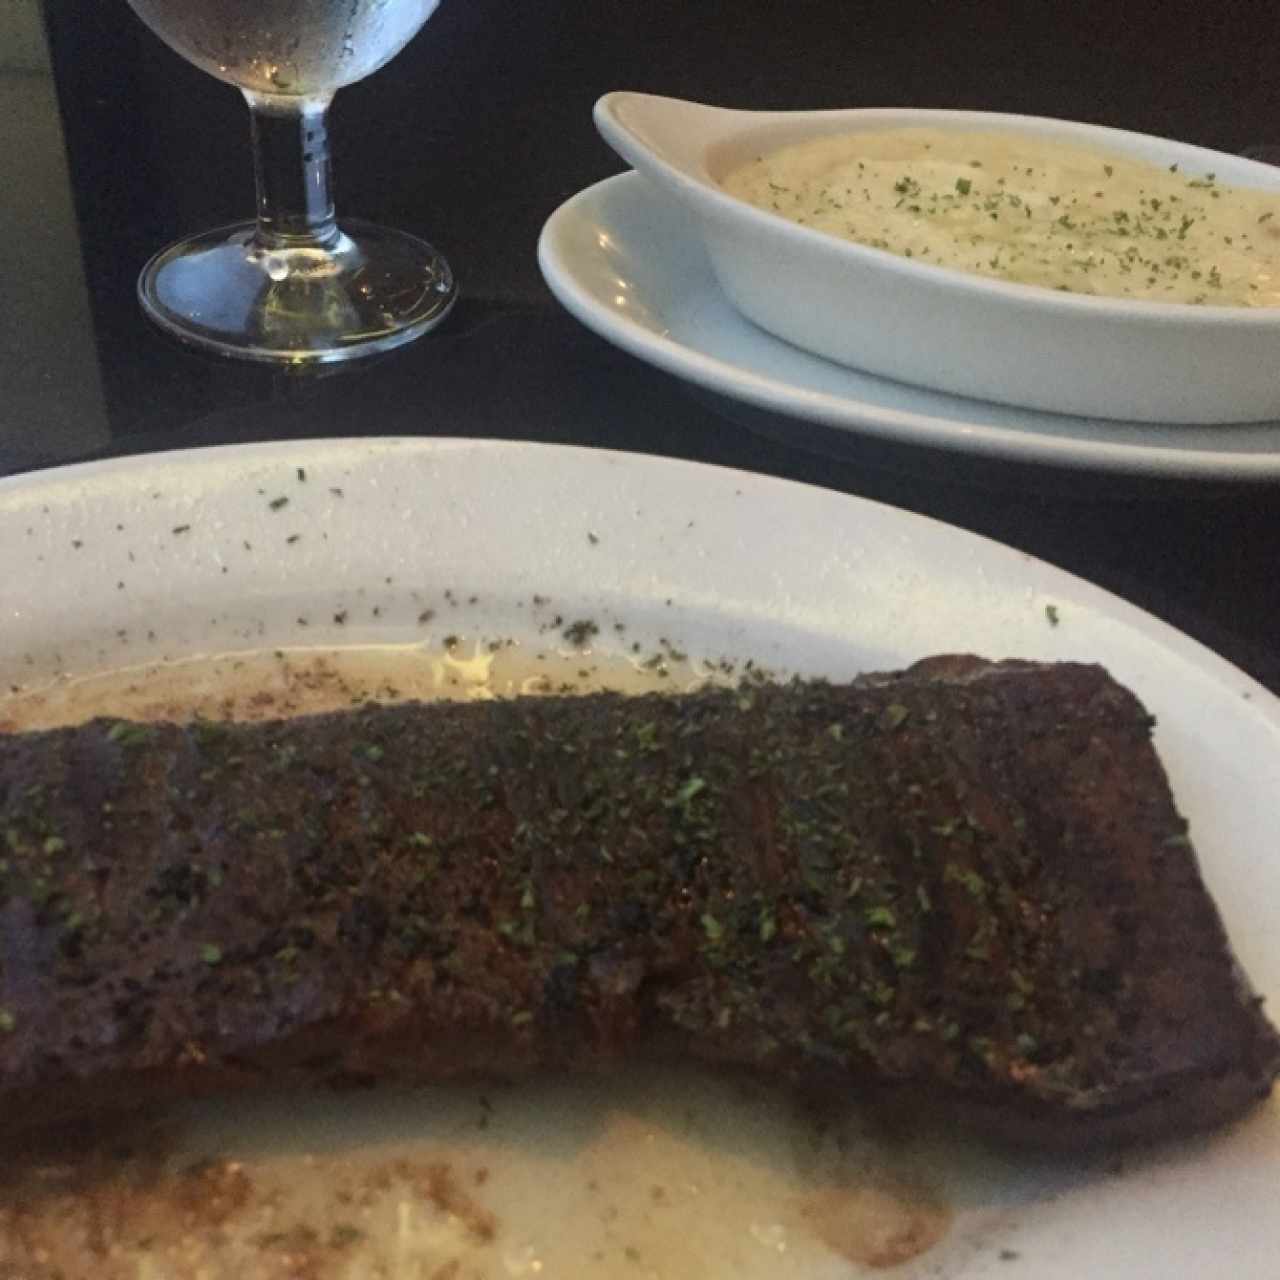 Skirt steak with mashed potatoes